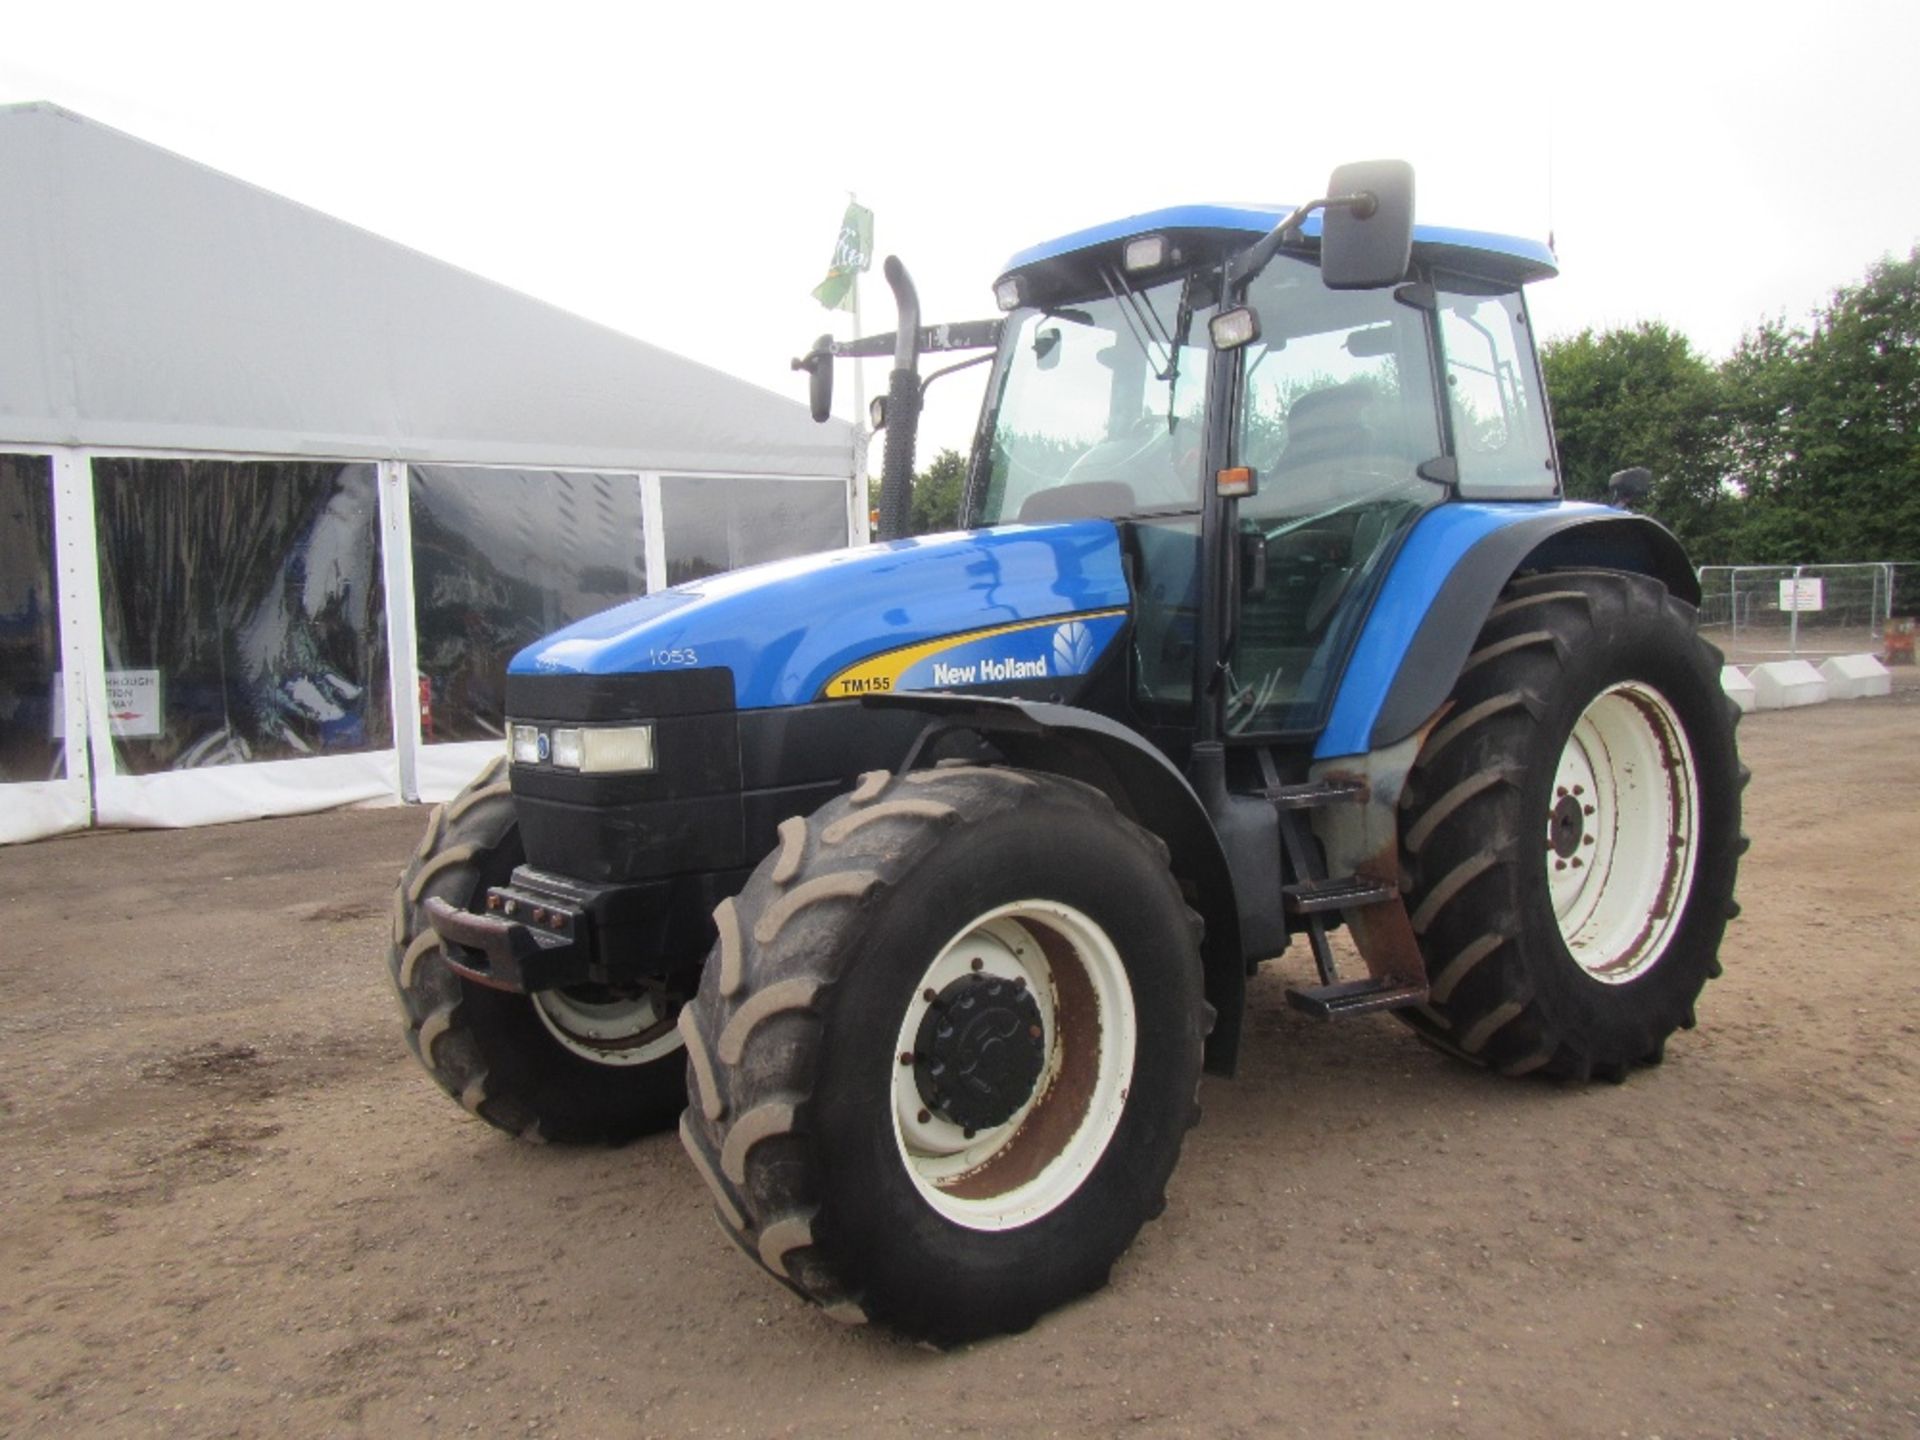 New Holland TM155 Tractor with Cab Suspension, Air Con & Air Seat. Reg. No. HX04 PVE.